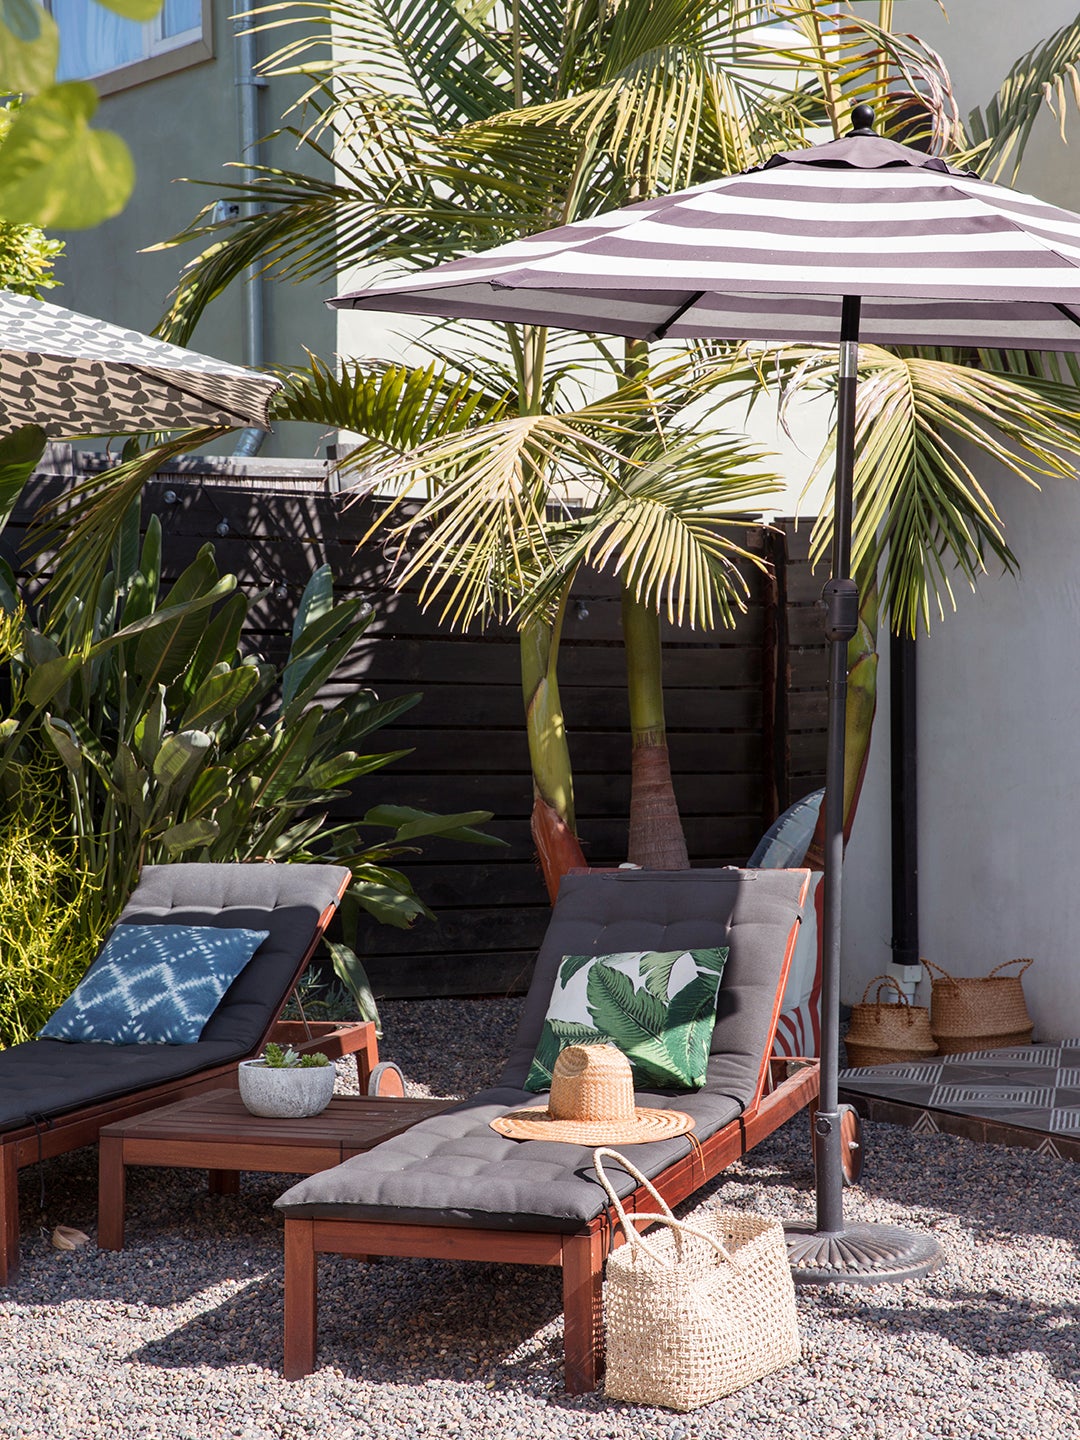 outdoor space with striped umbrella